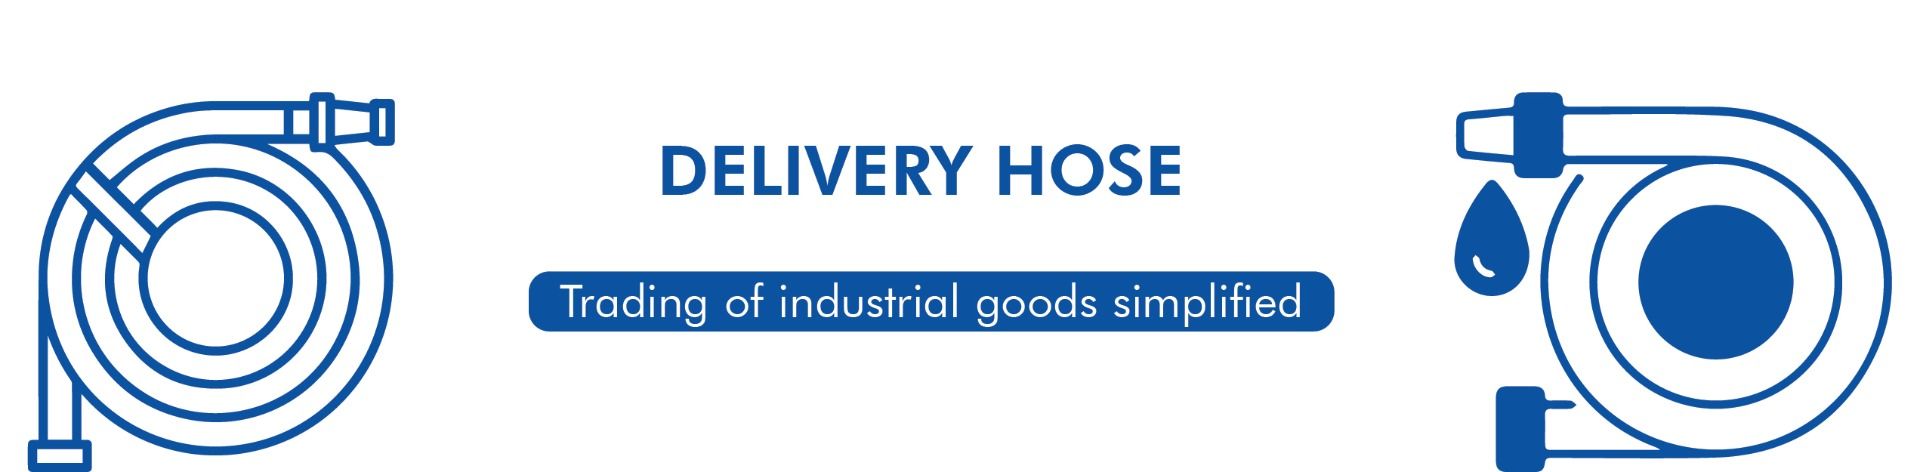 Delivery-hose